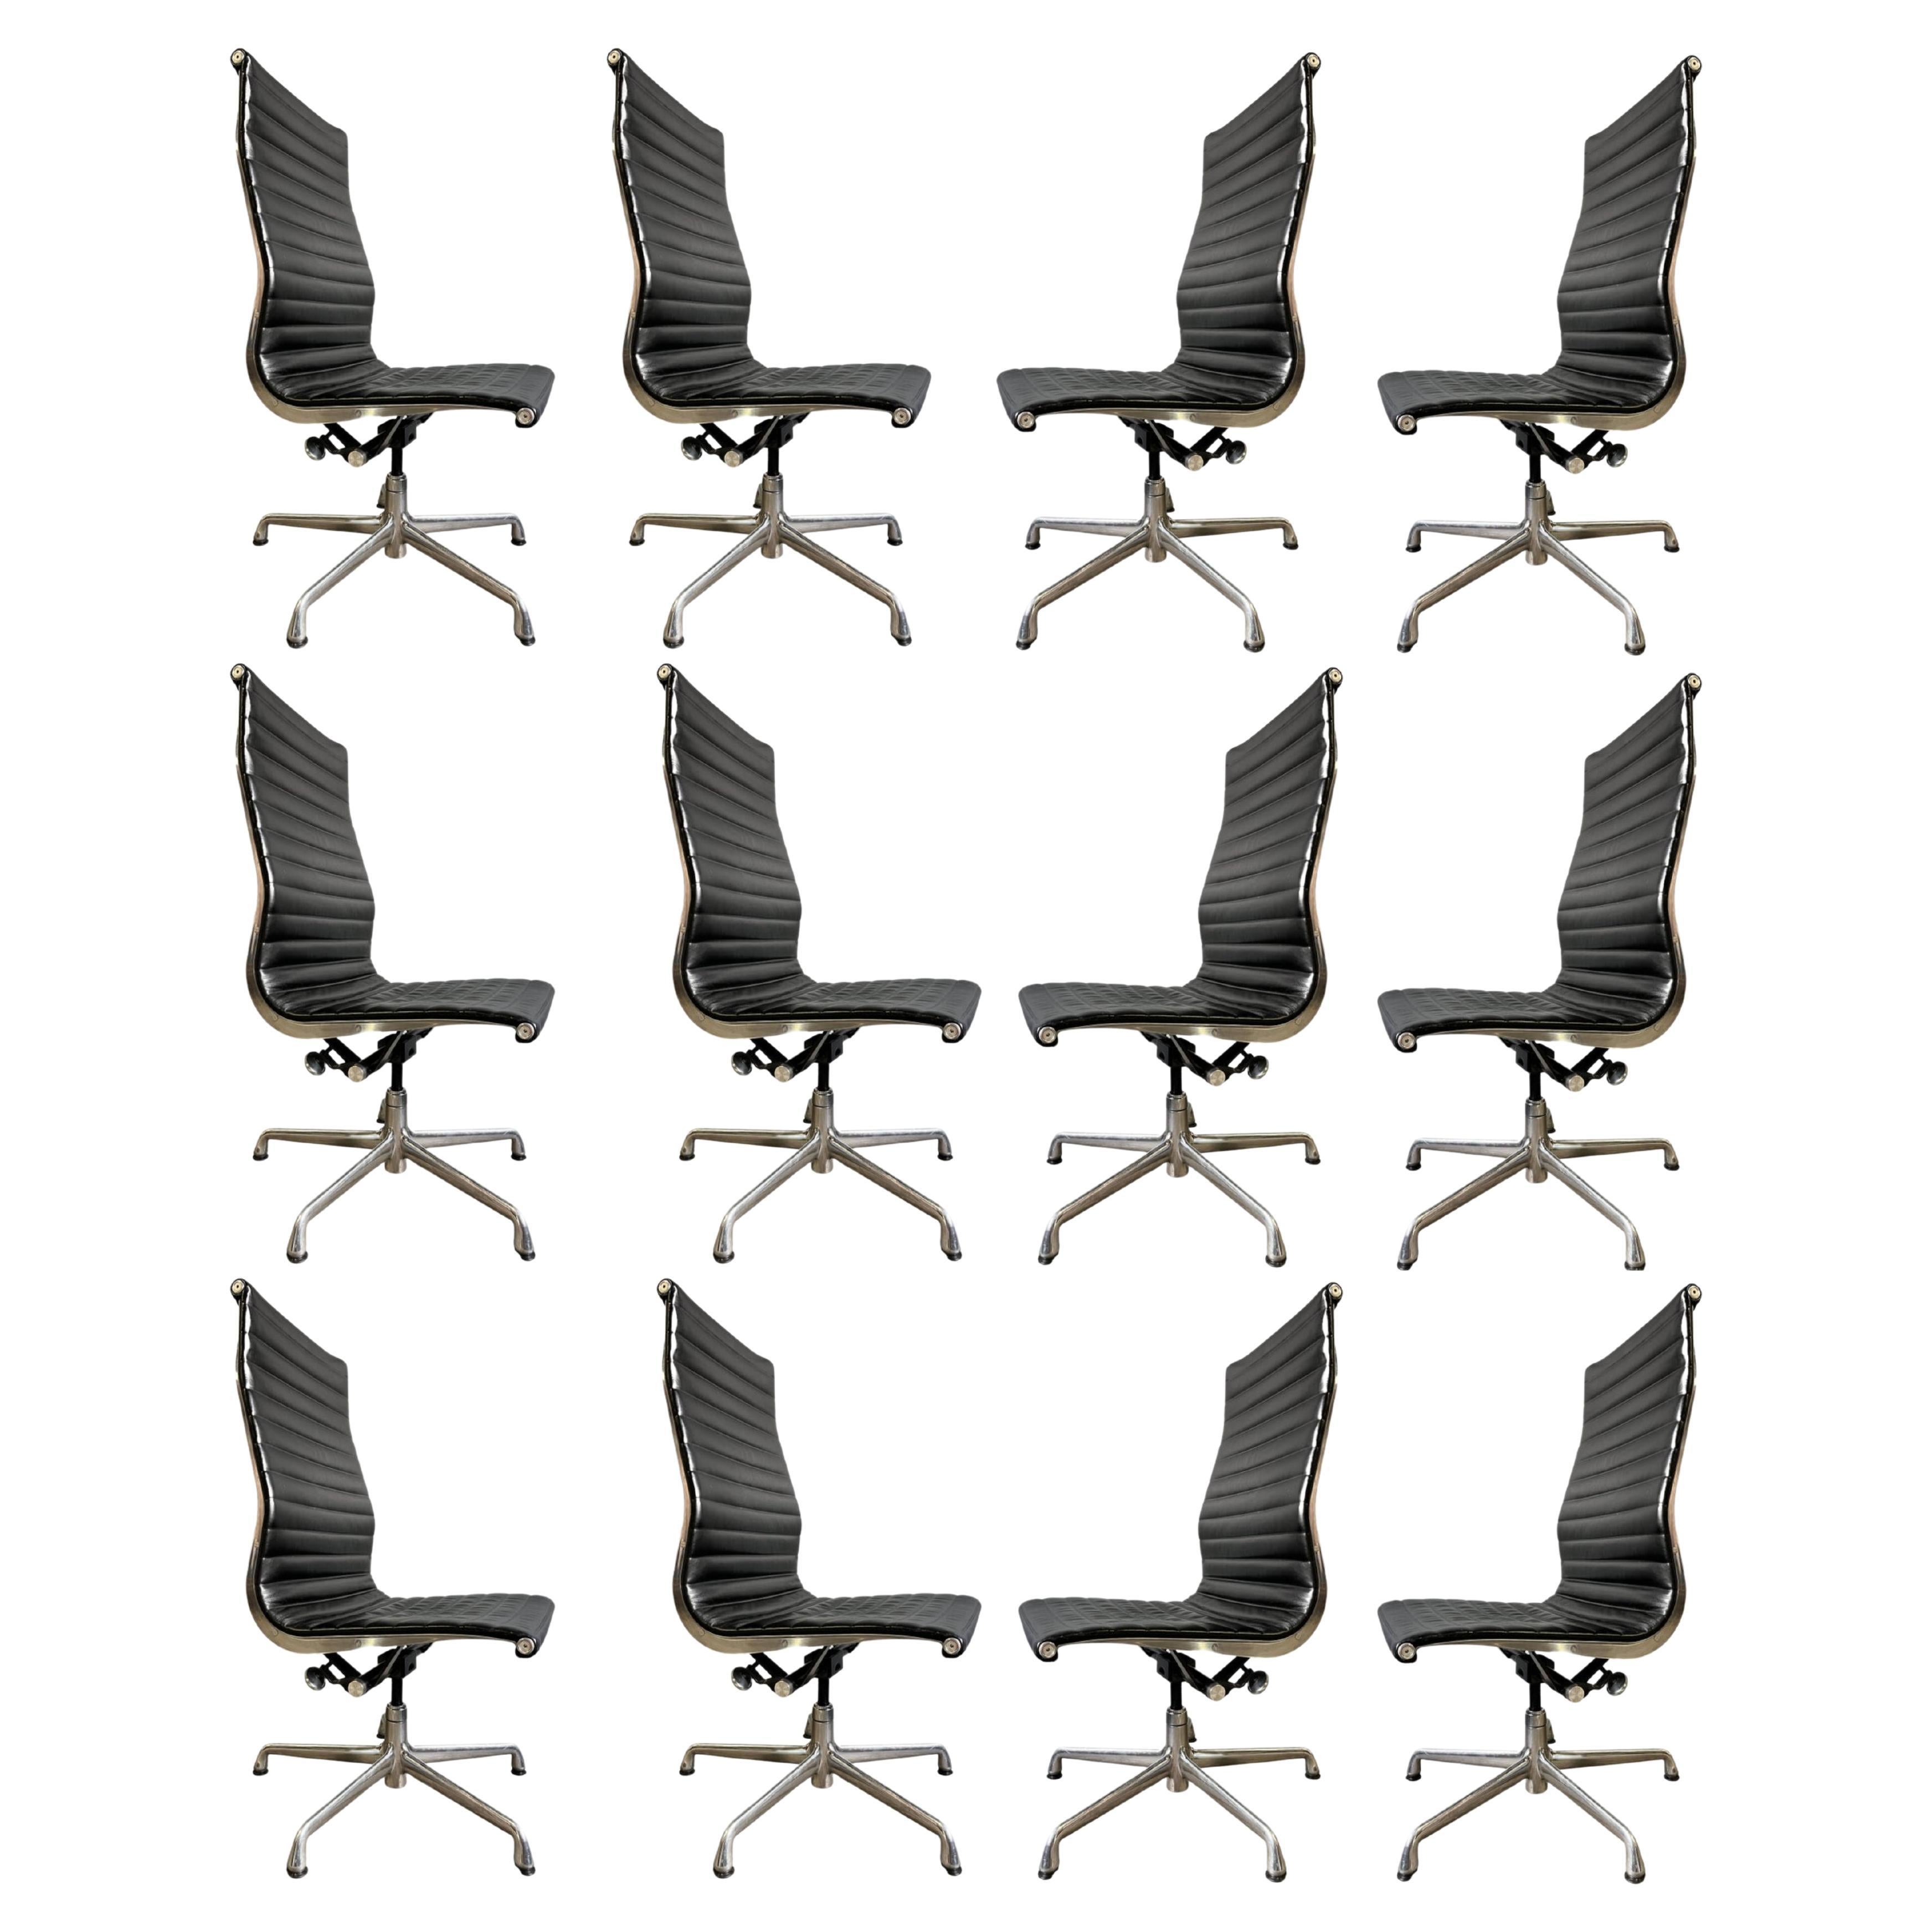 Sold individual. 30 available !

Eames for Herman Miller Aluminum Group chairs in premium plush black leather with high-backs. We have many sets that had been used as dining chairs with foot glides and armless. Also available with casters. A very